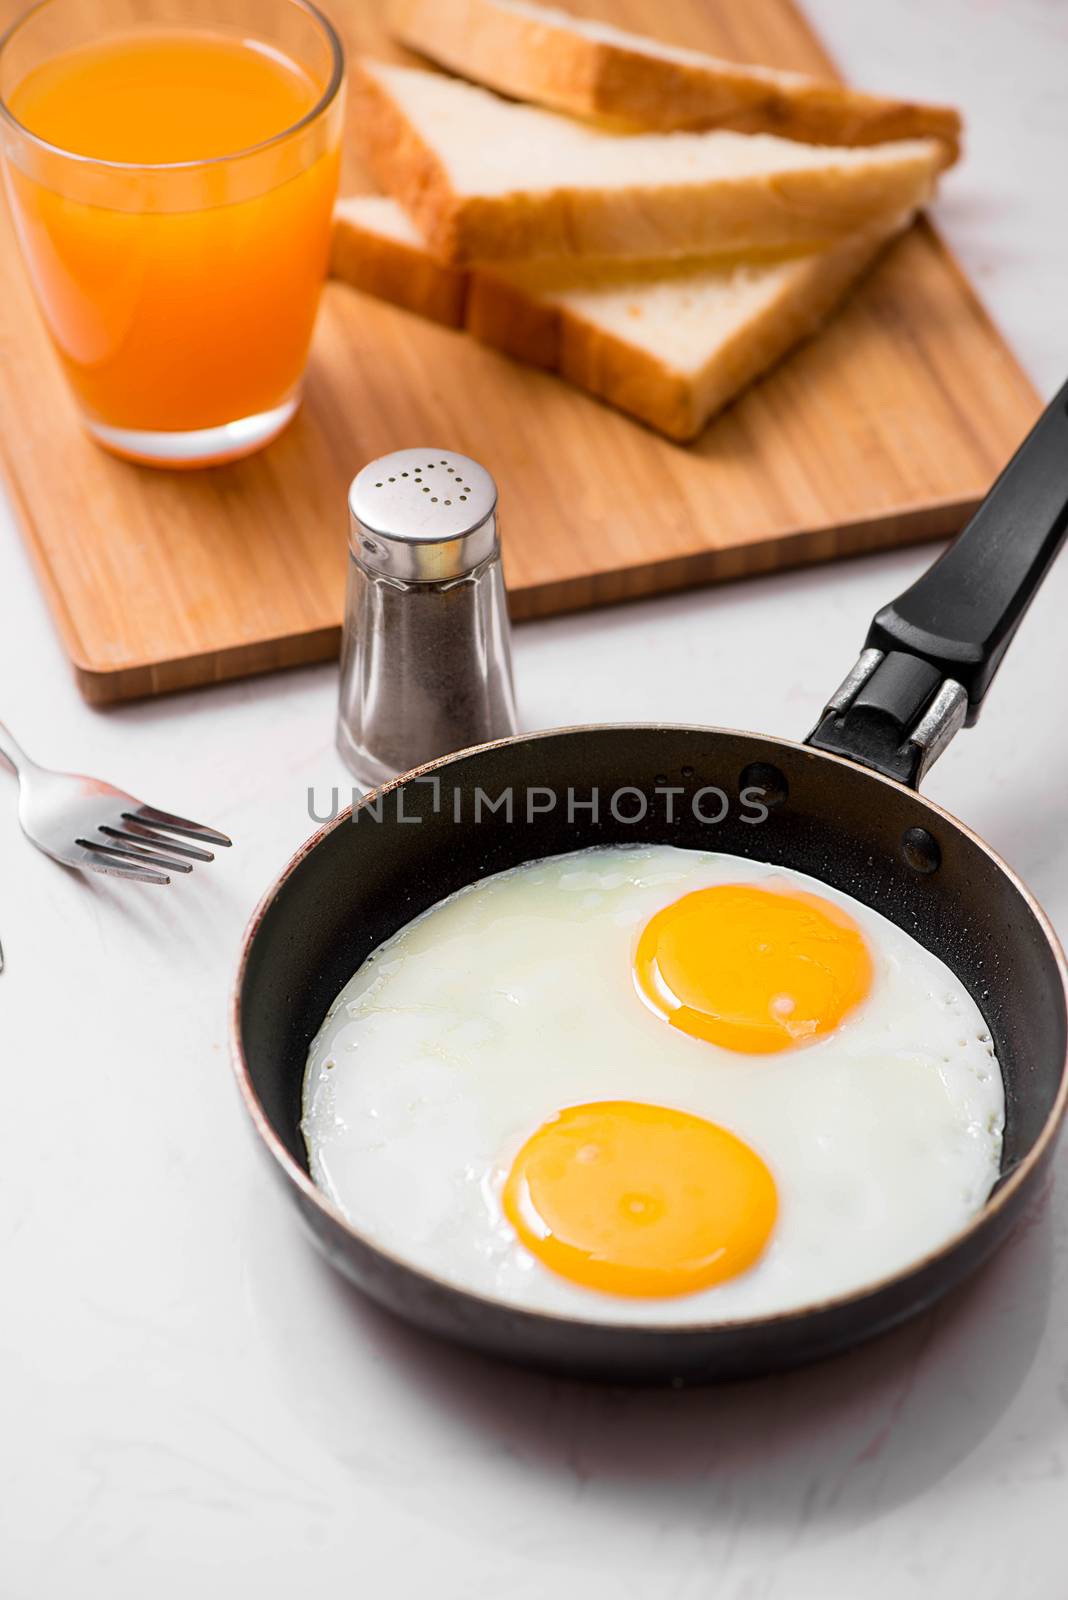 Top view of traditional healthy easy quick breakfast meal made of fried eggs served on a frying pan.